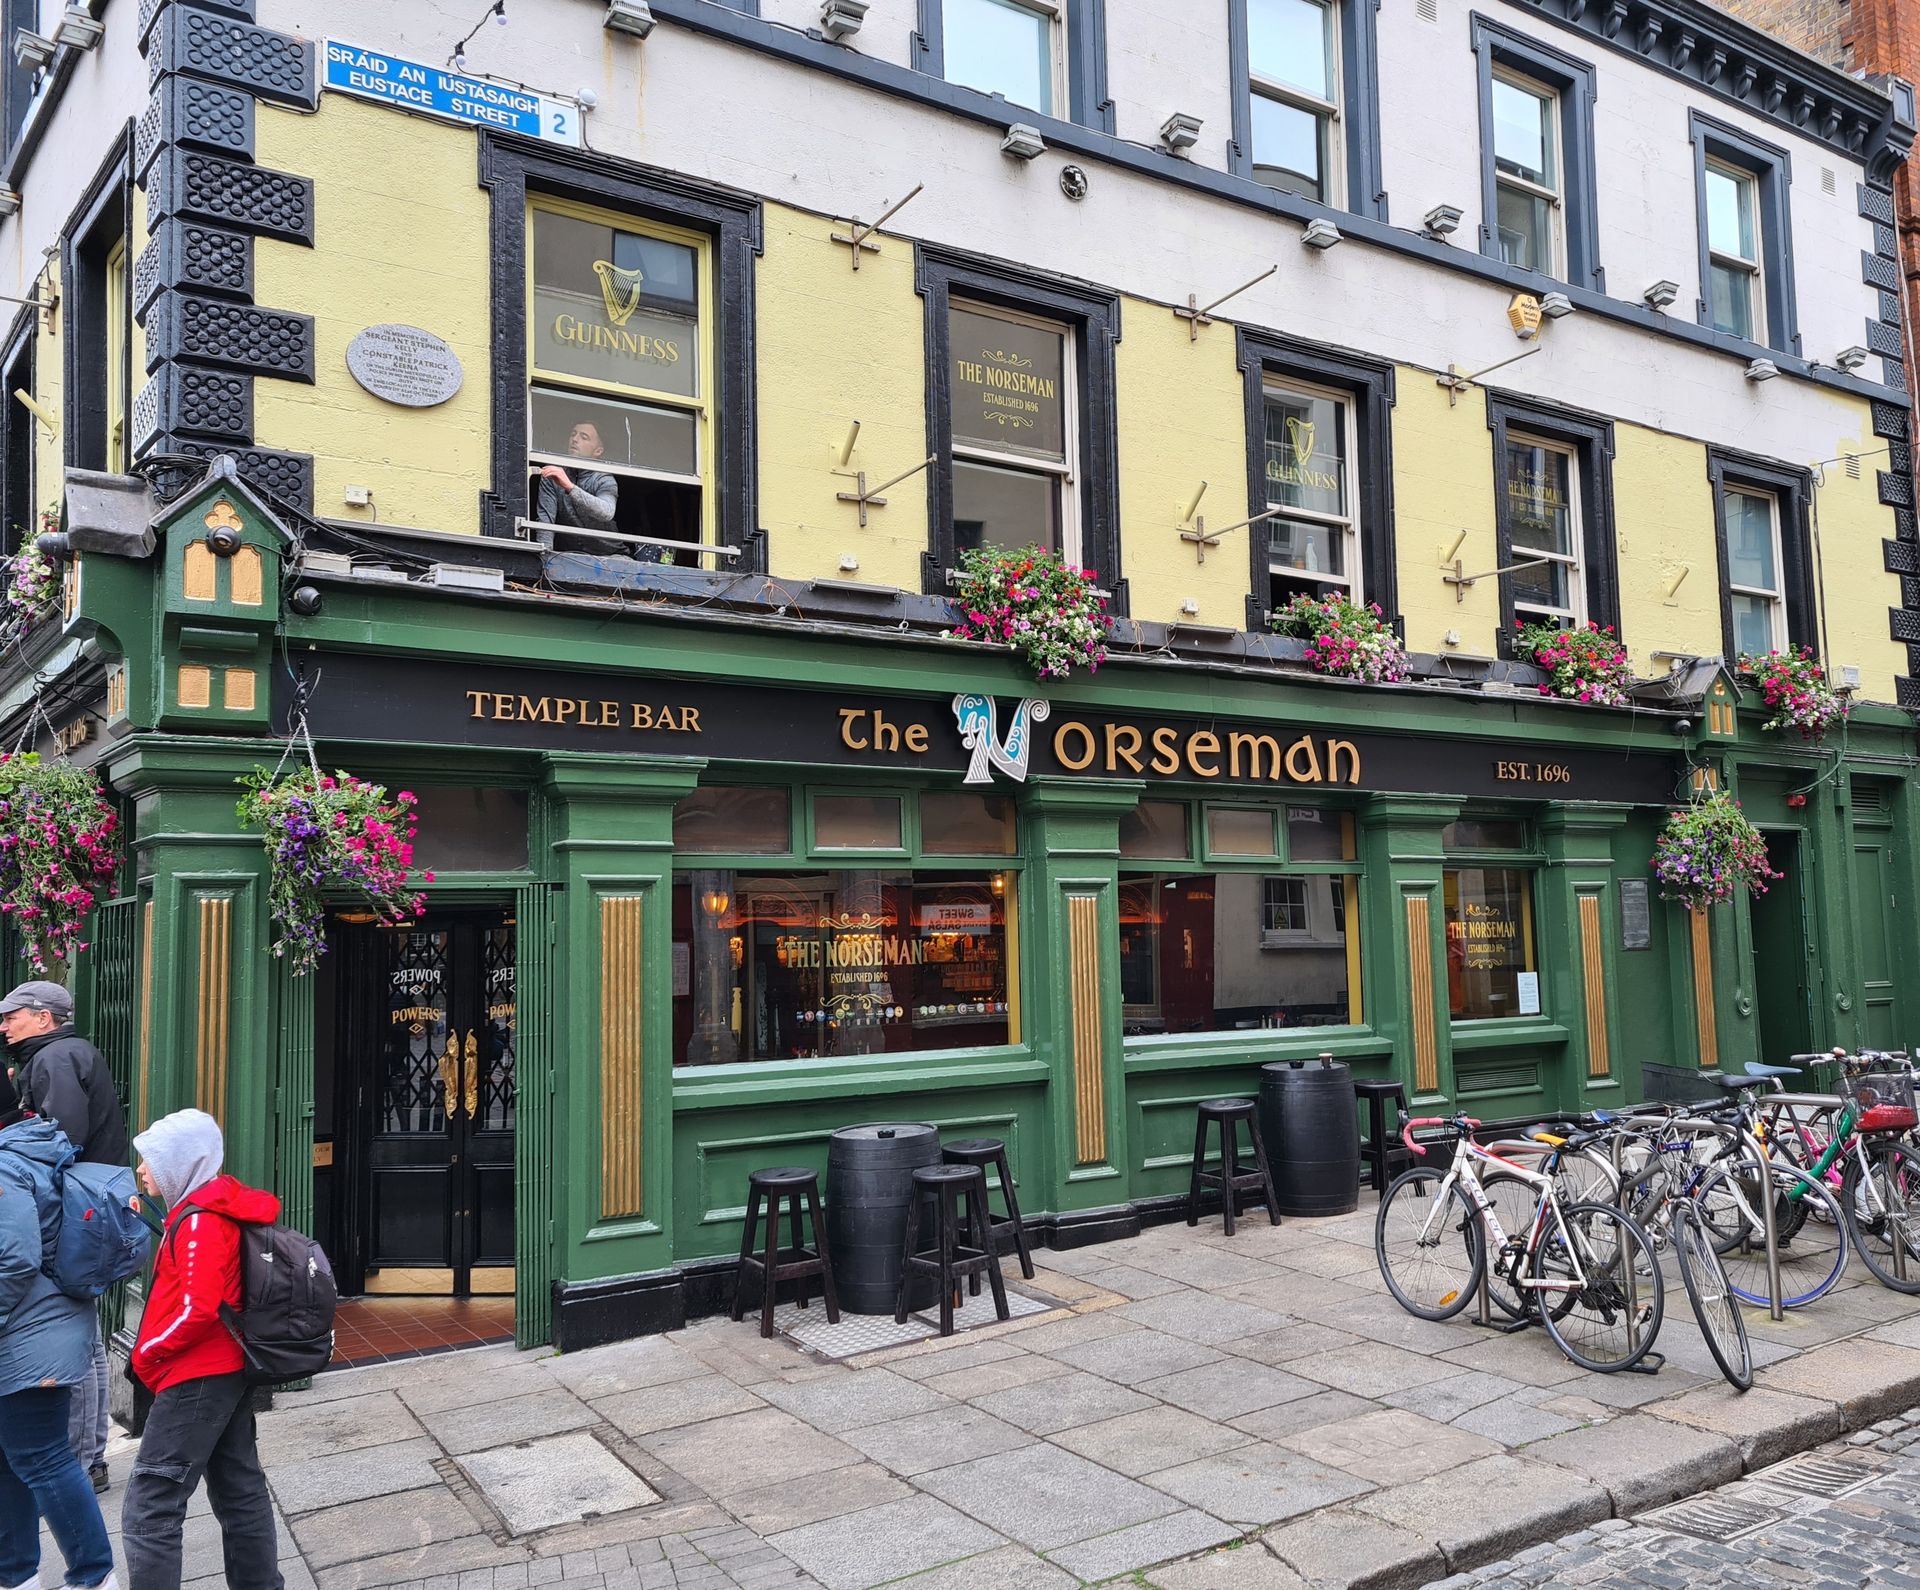 One of the countless pubs in the picturesque streets of Dublin